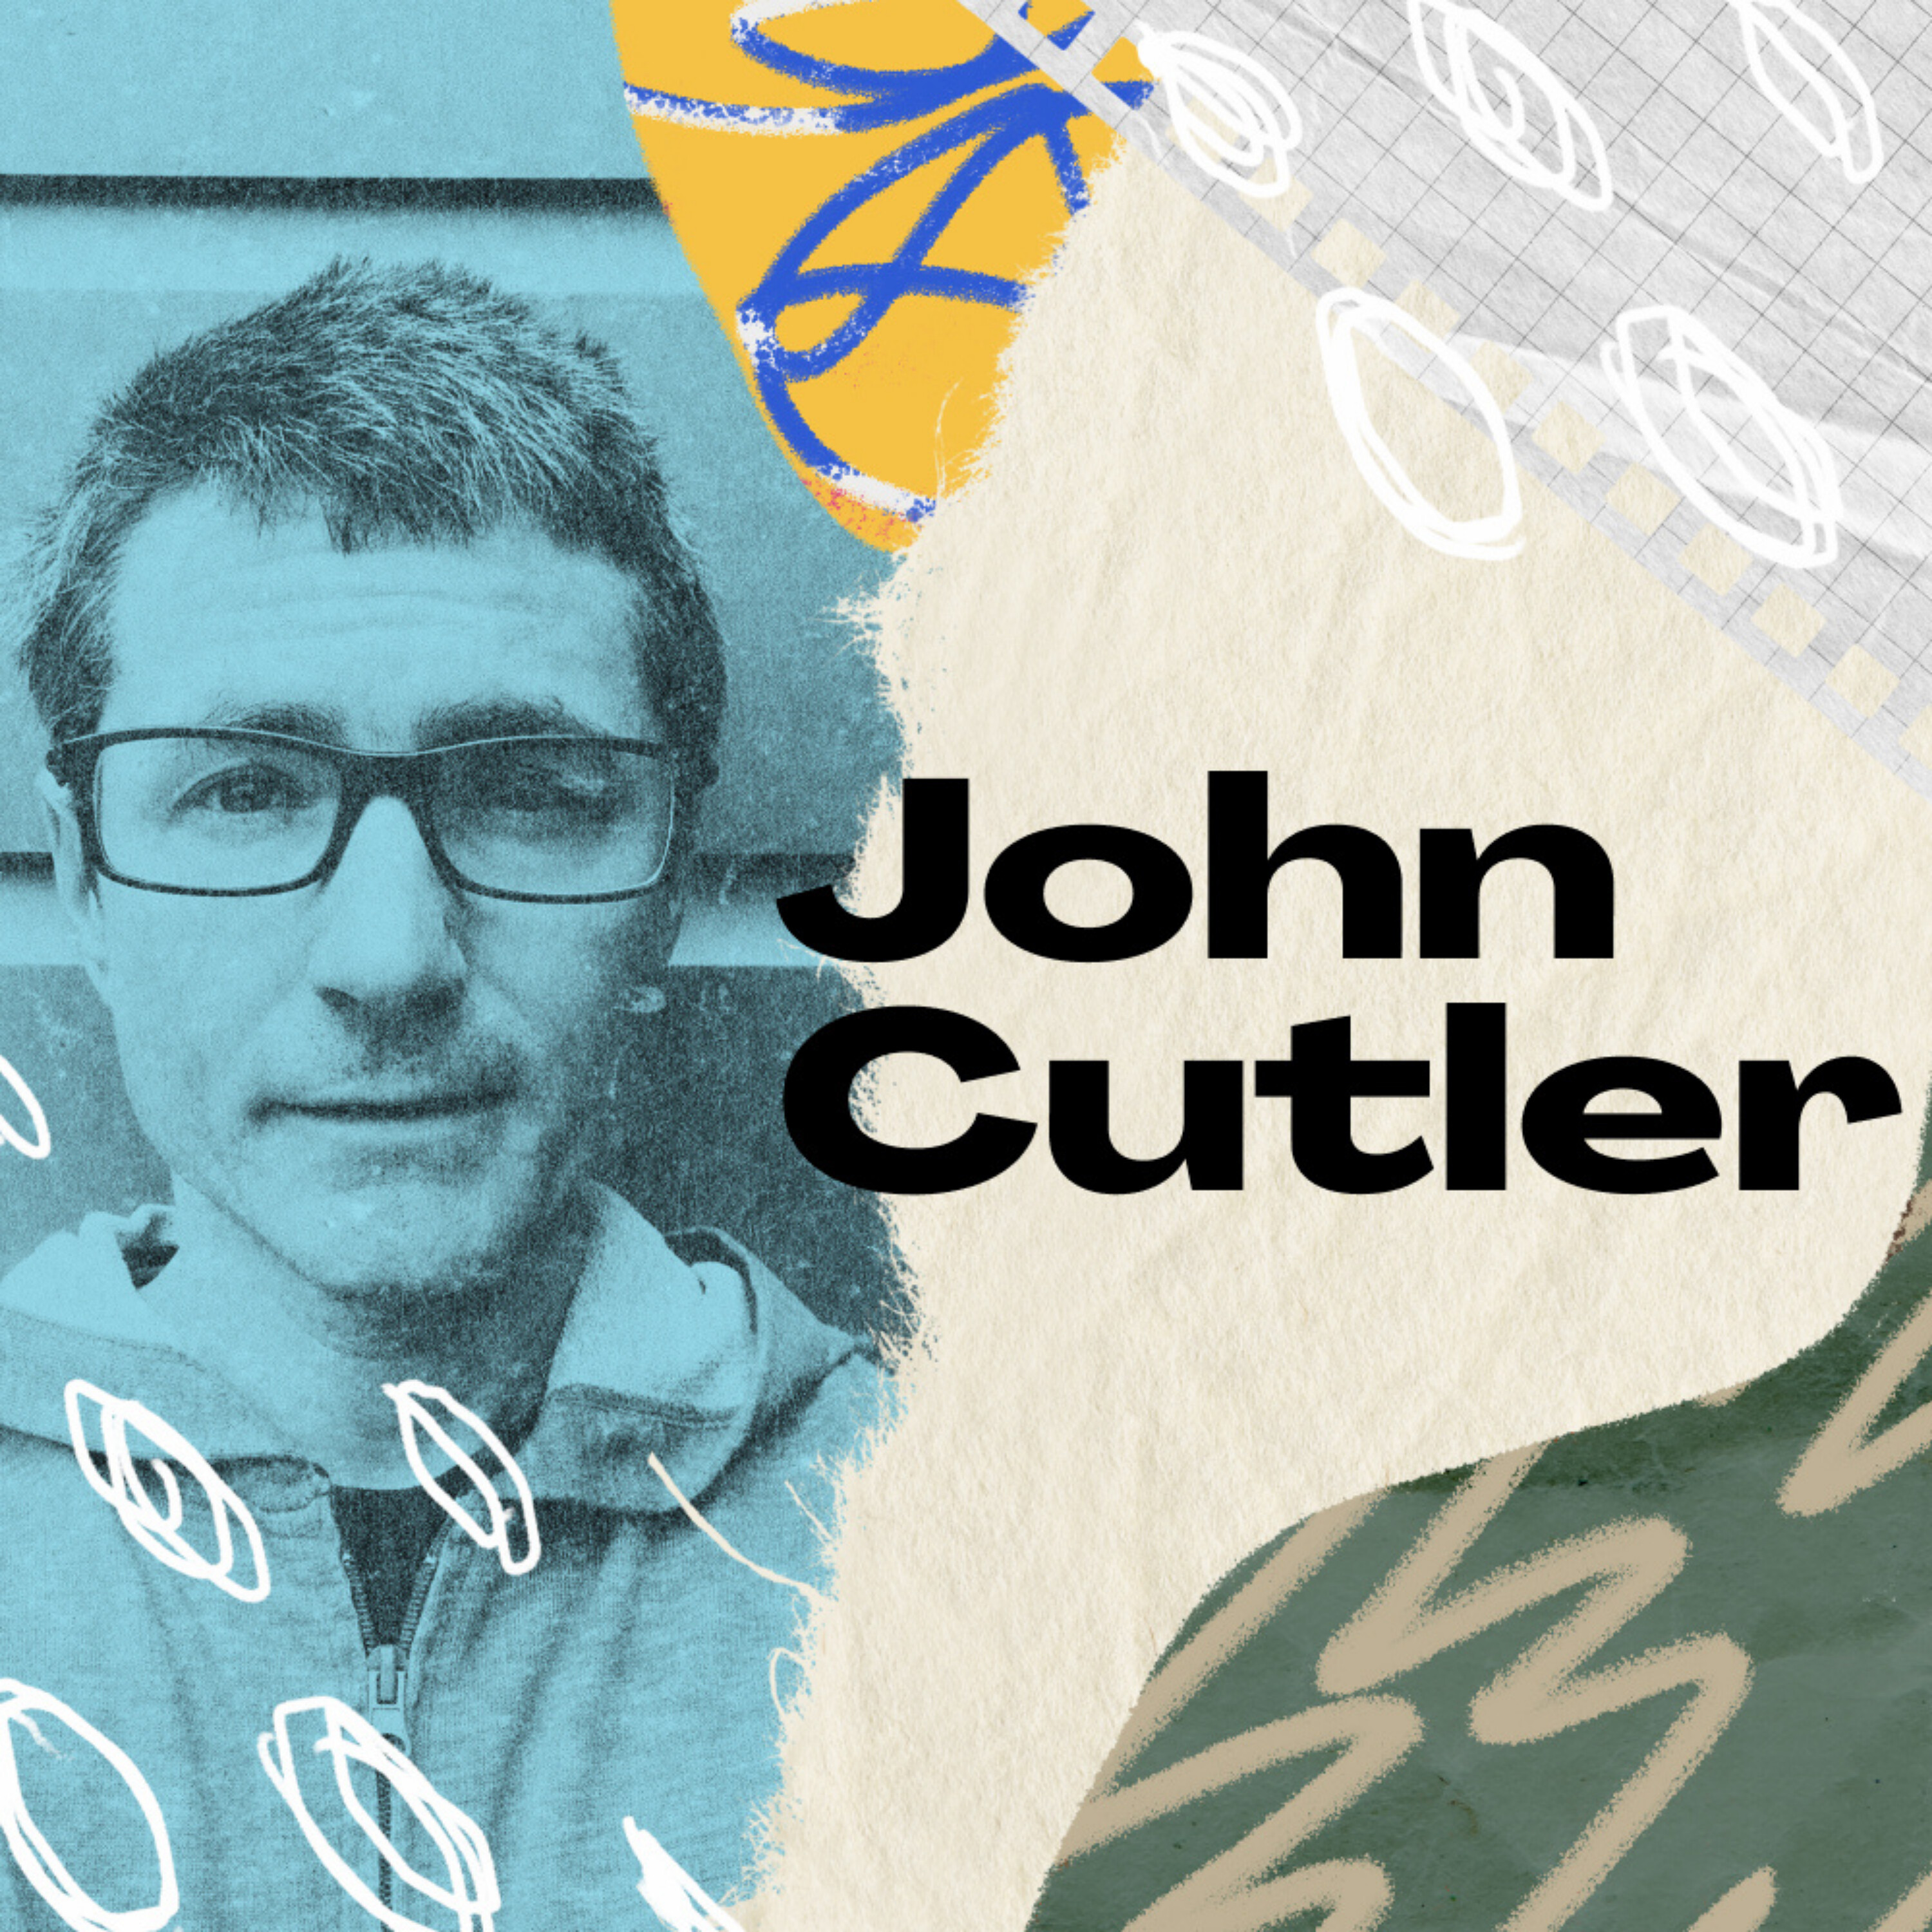 Product evangelist John Cutler on becoming a catalyst for change